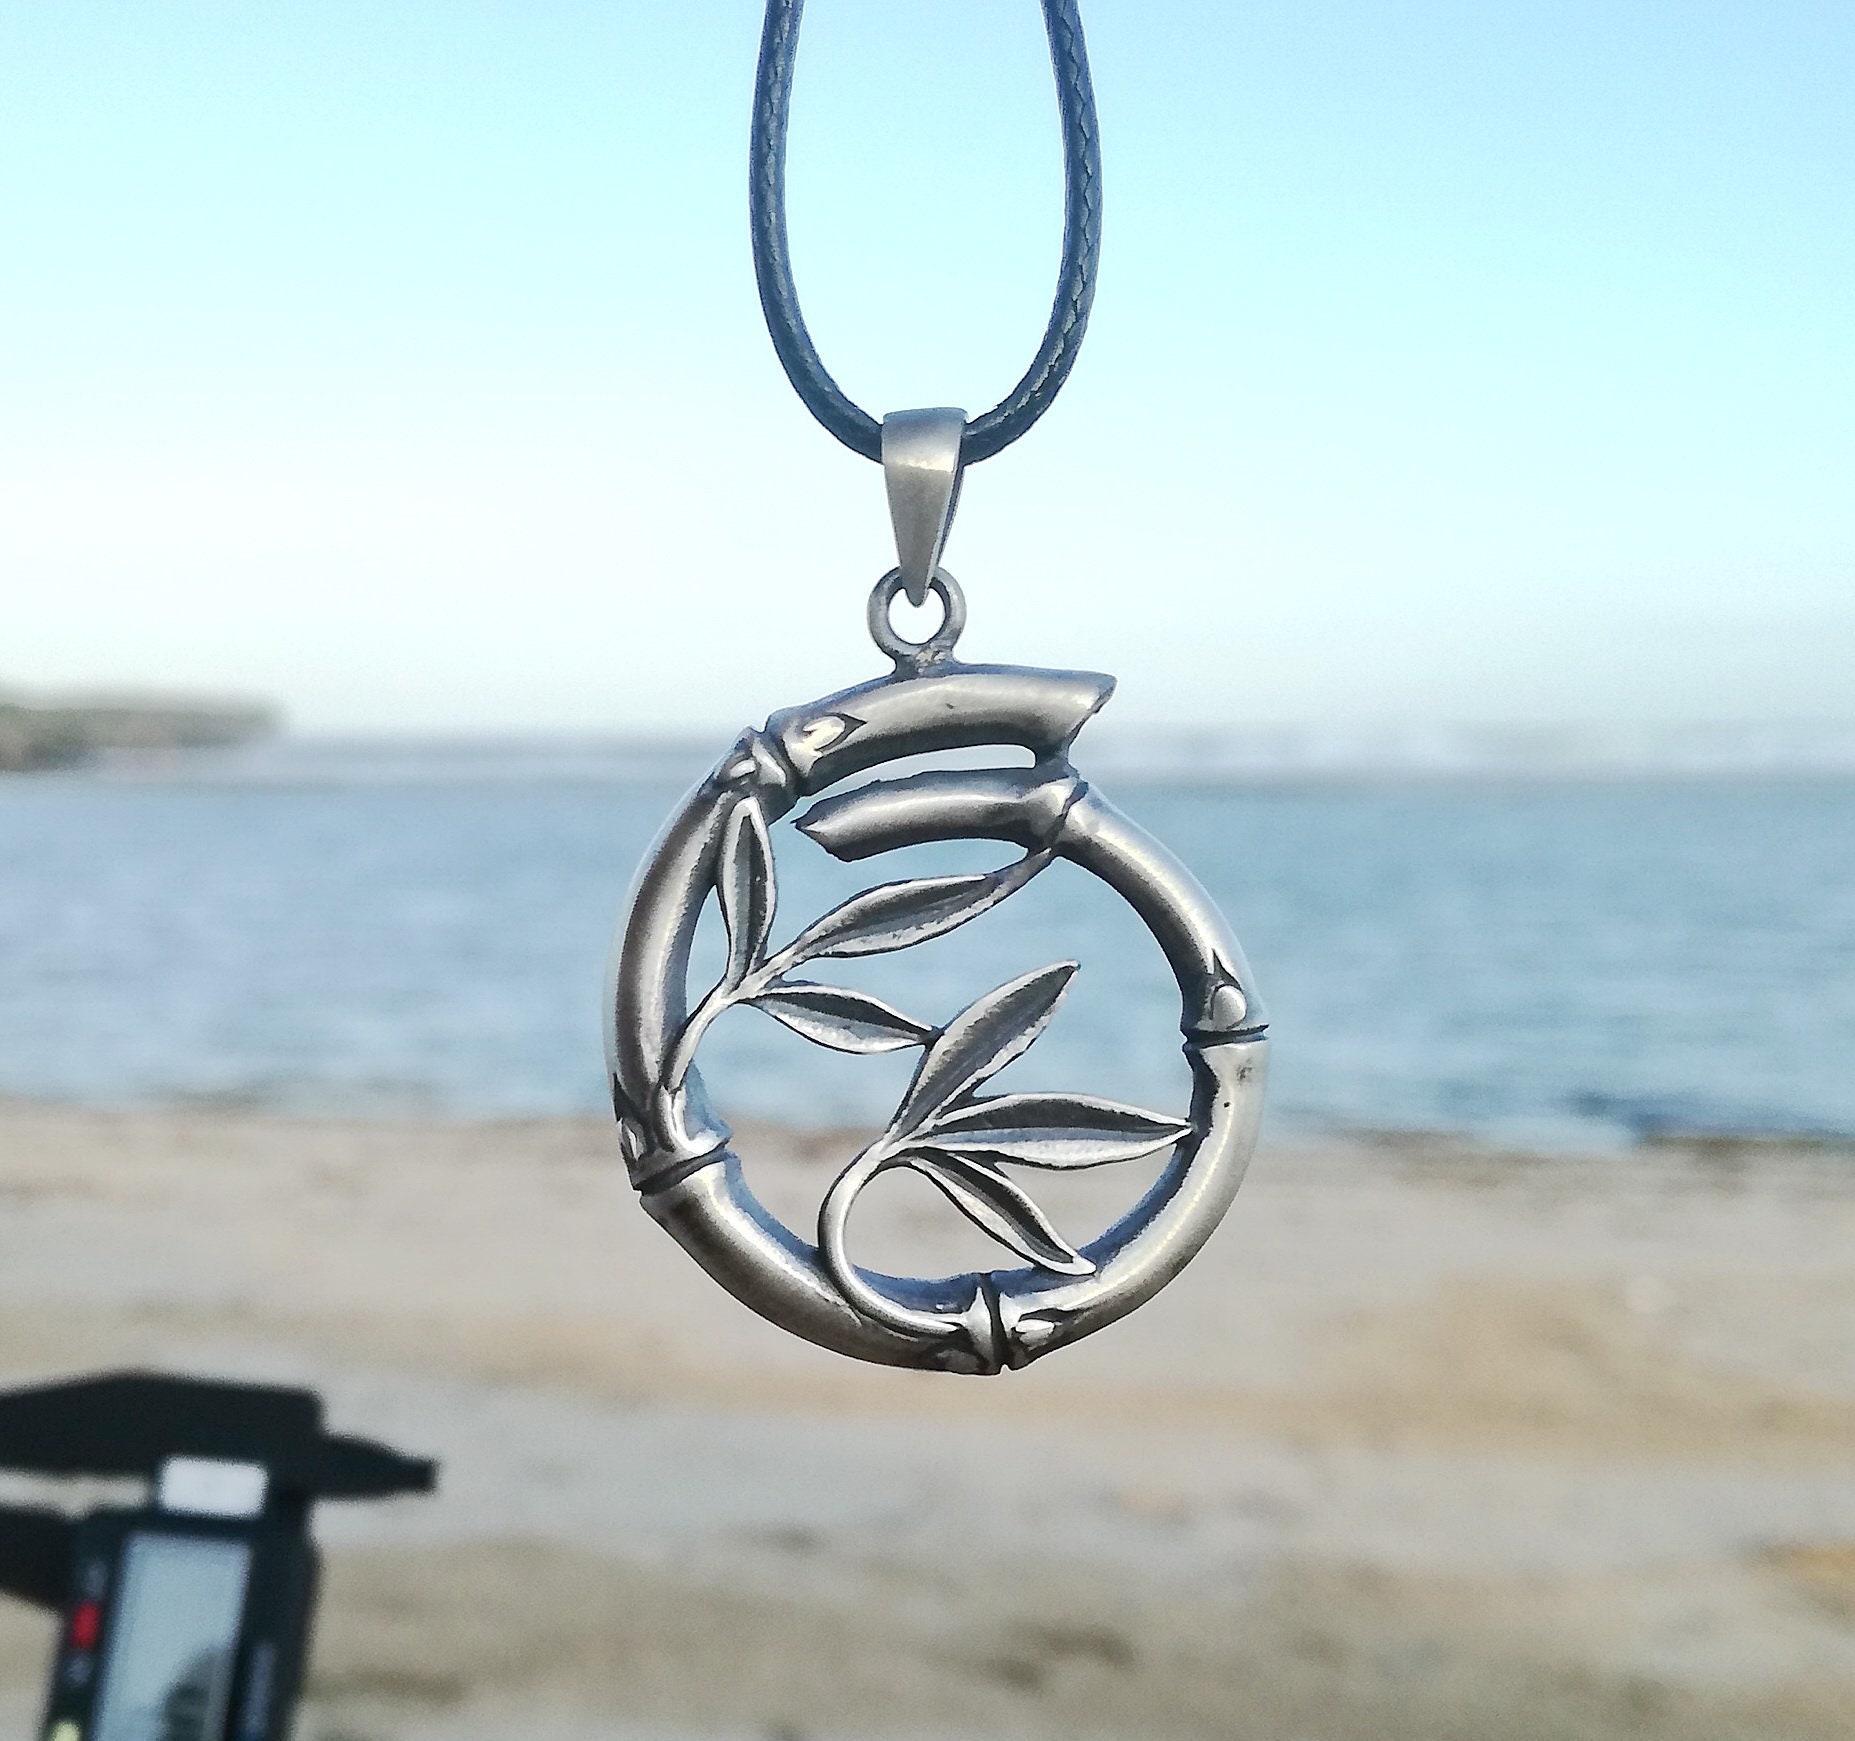 Bamboo Universal Pendant Bracelet Keychain Sterling Silver Necklace Black Nylon Cord Silver Sun Style Jewelry Handmade From  Bali